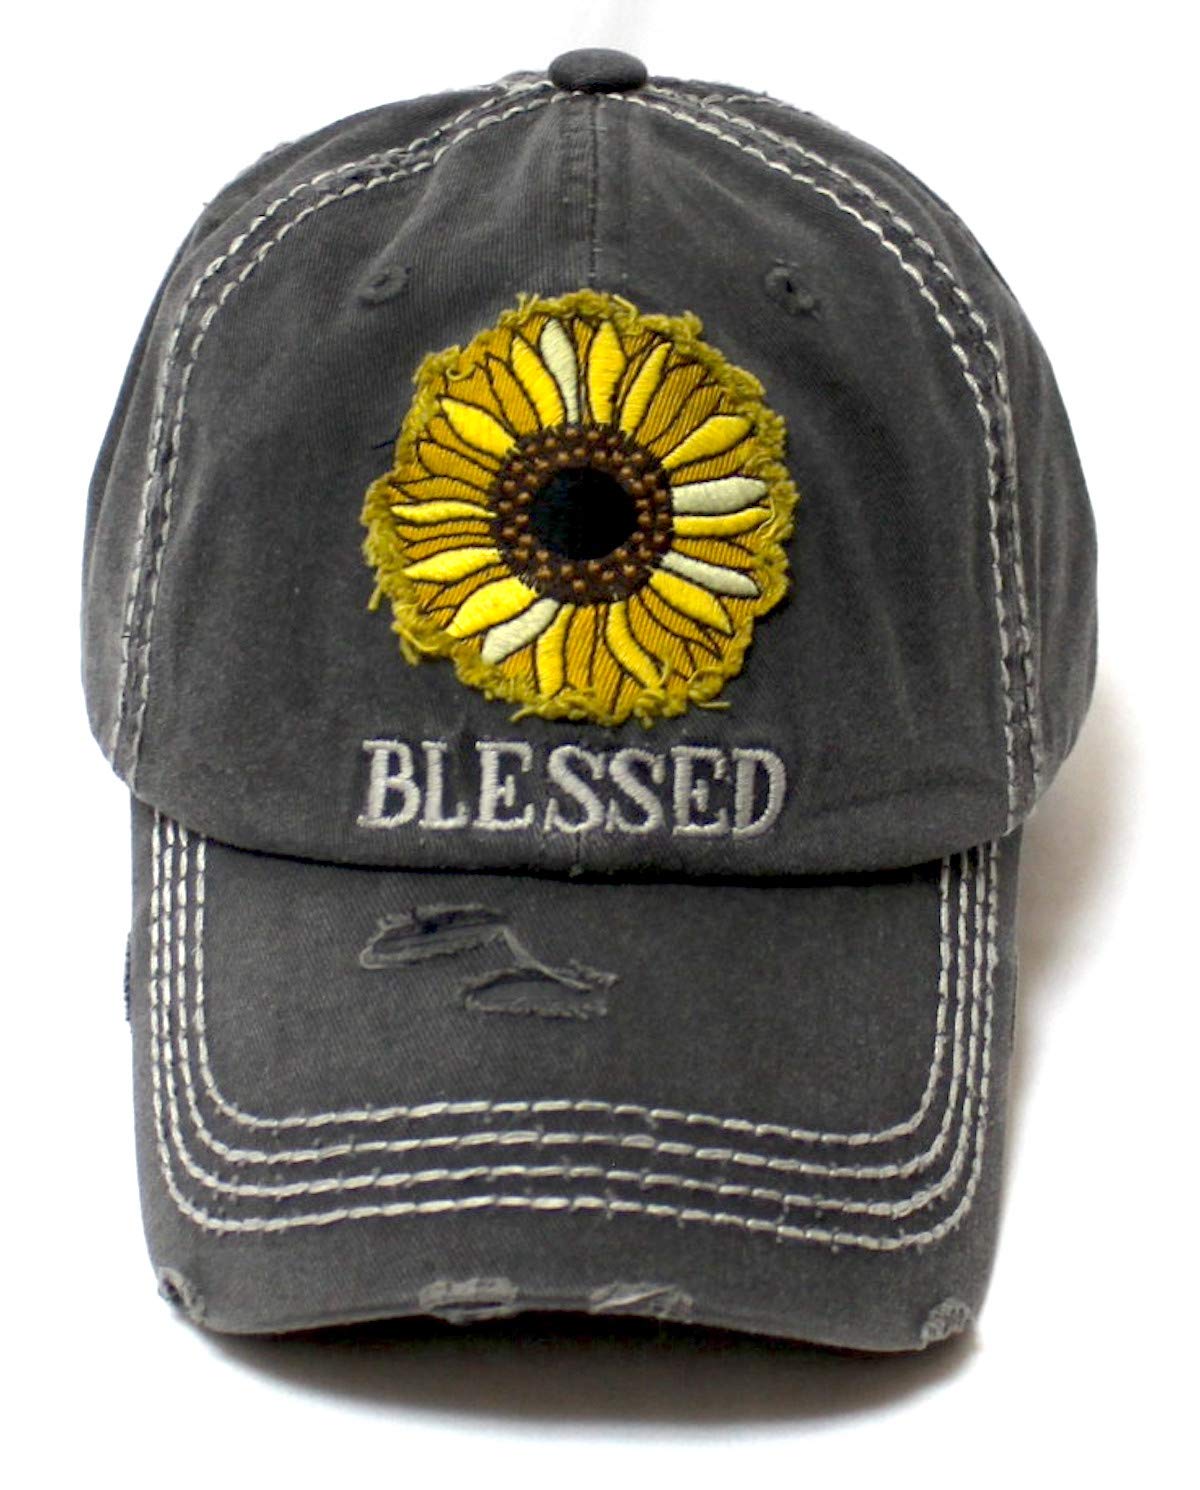 CAPS 'N VINTAGE Women's Distressed Baseball Cap Blessed Sunflower Patch Embroidery Monogram Hat